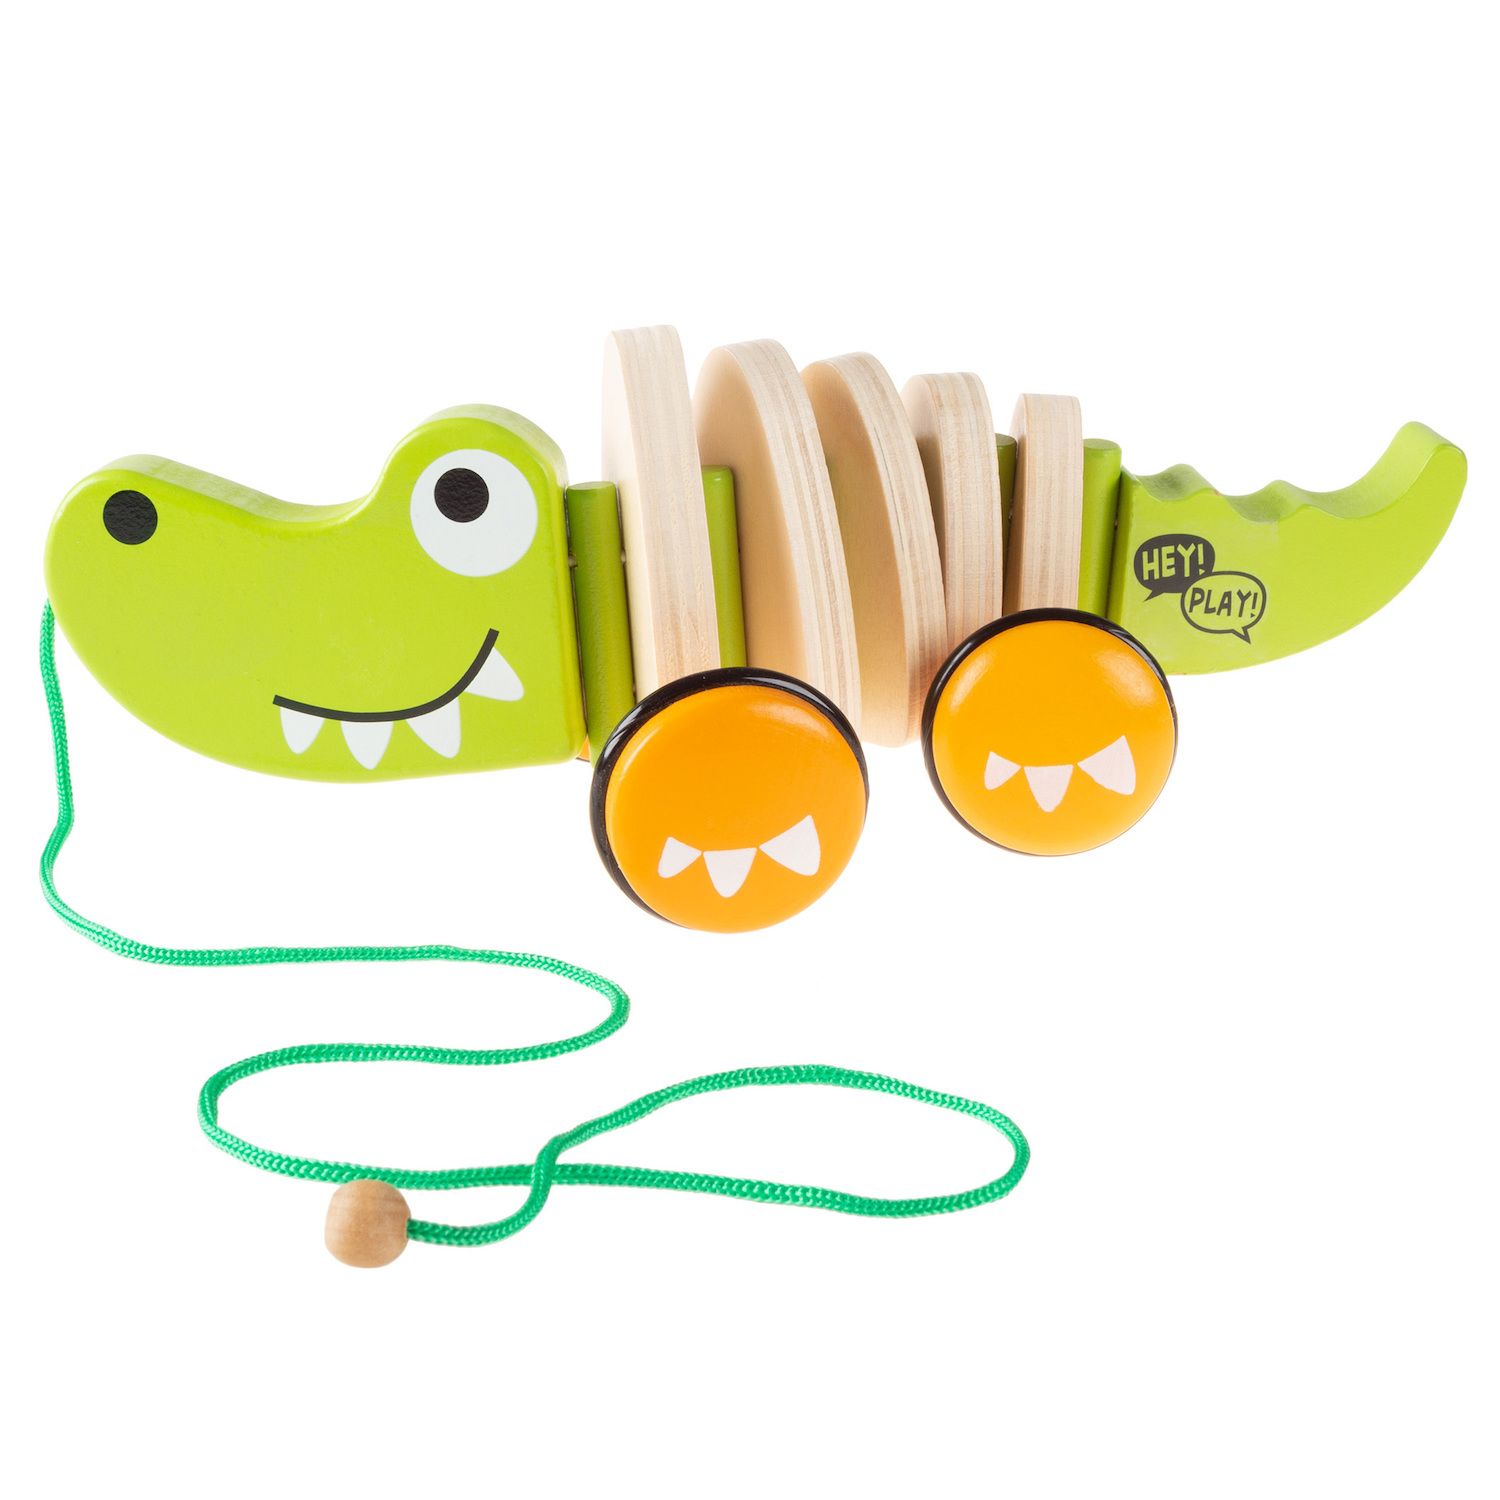 Image for Hey! Play! Old Fashioned Wooden Pull Toy - Walk Along Alligator at Kohl's.